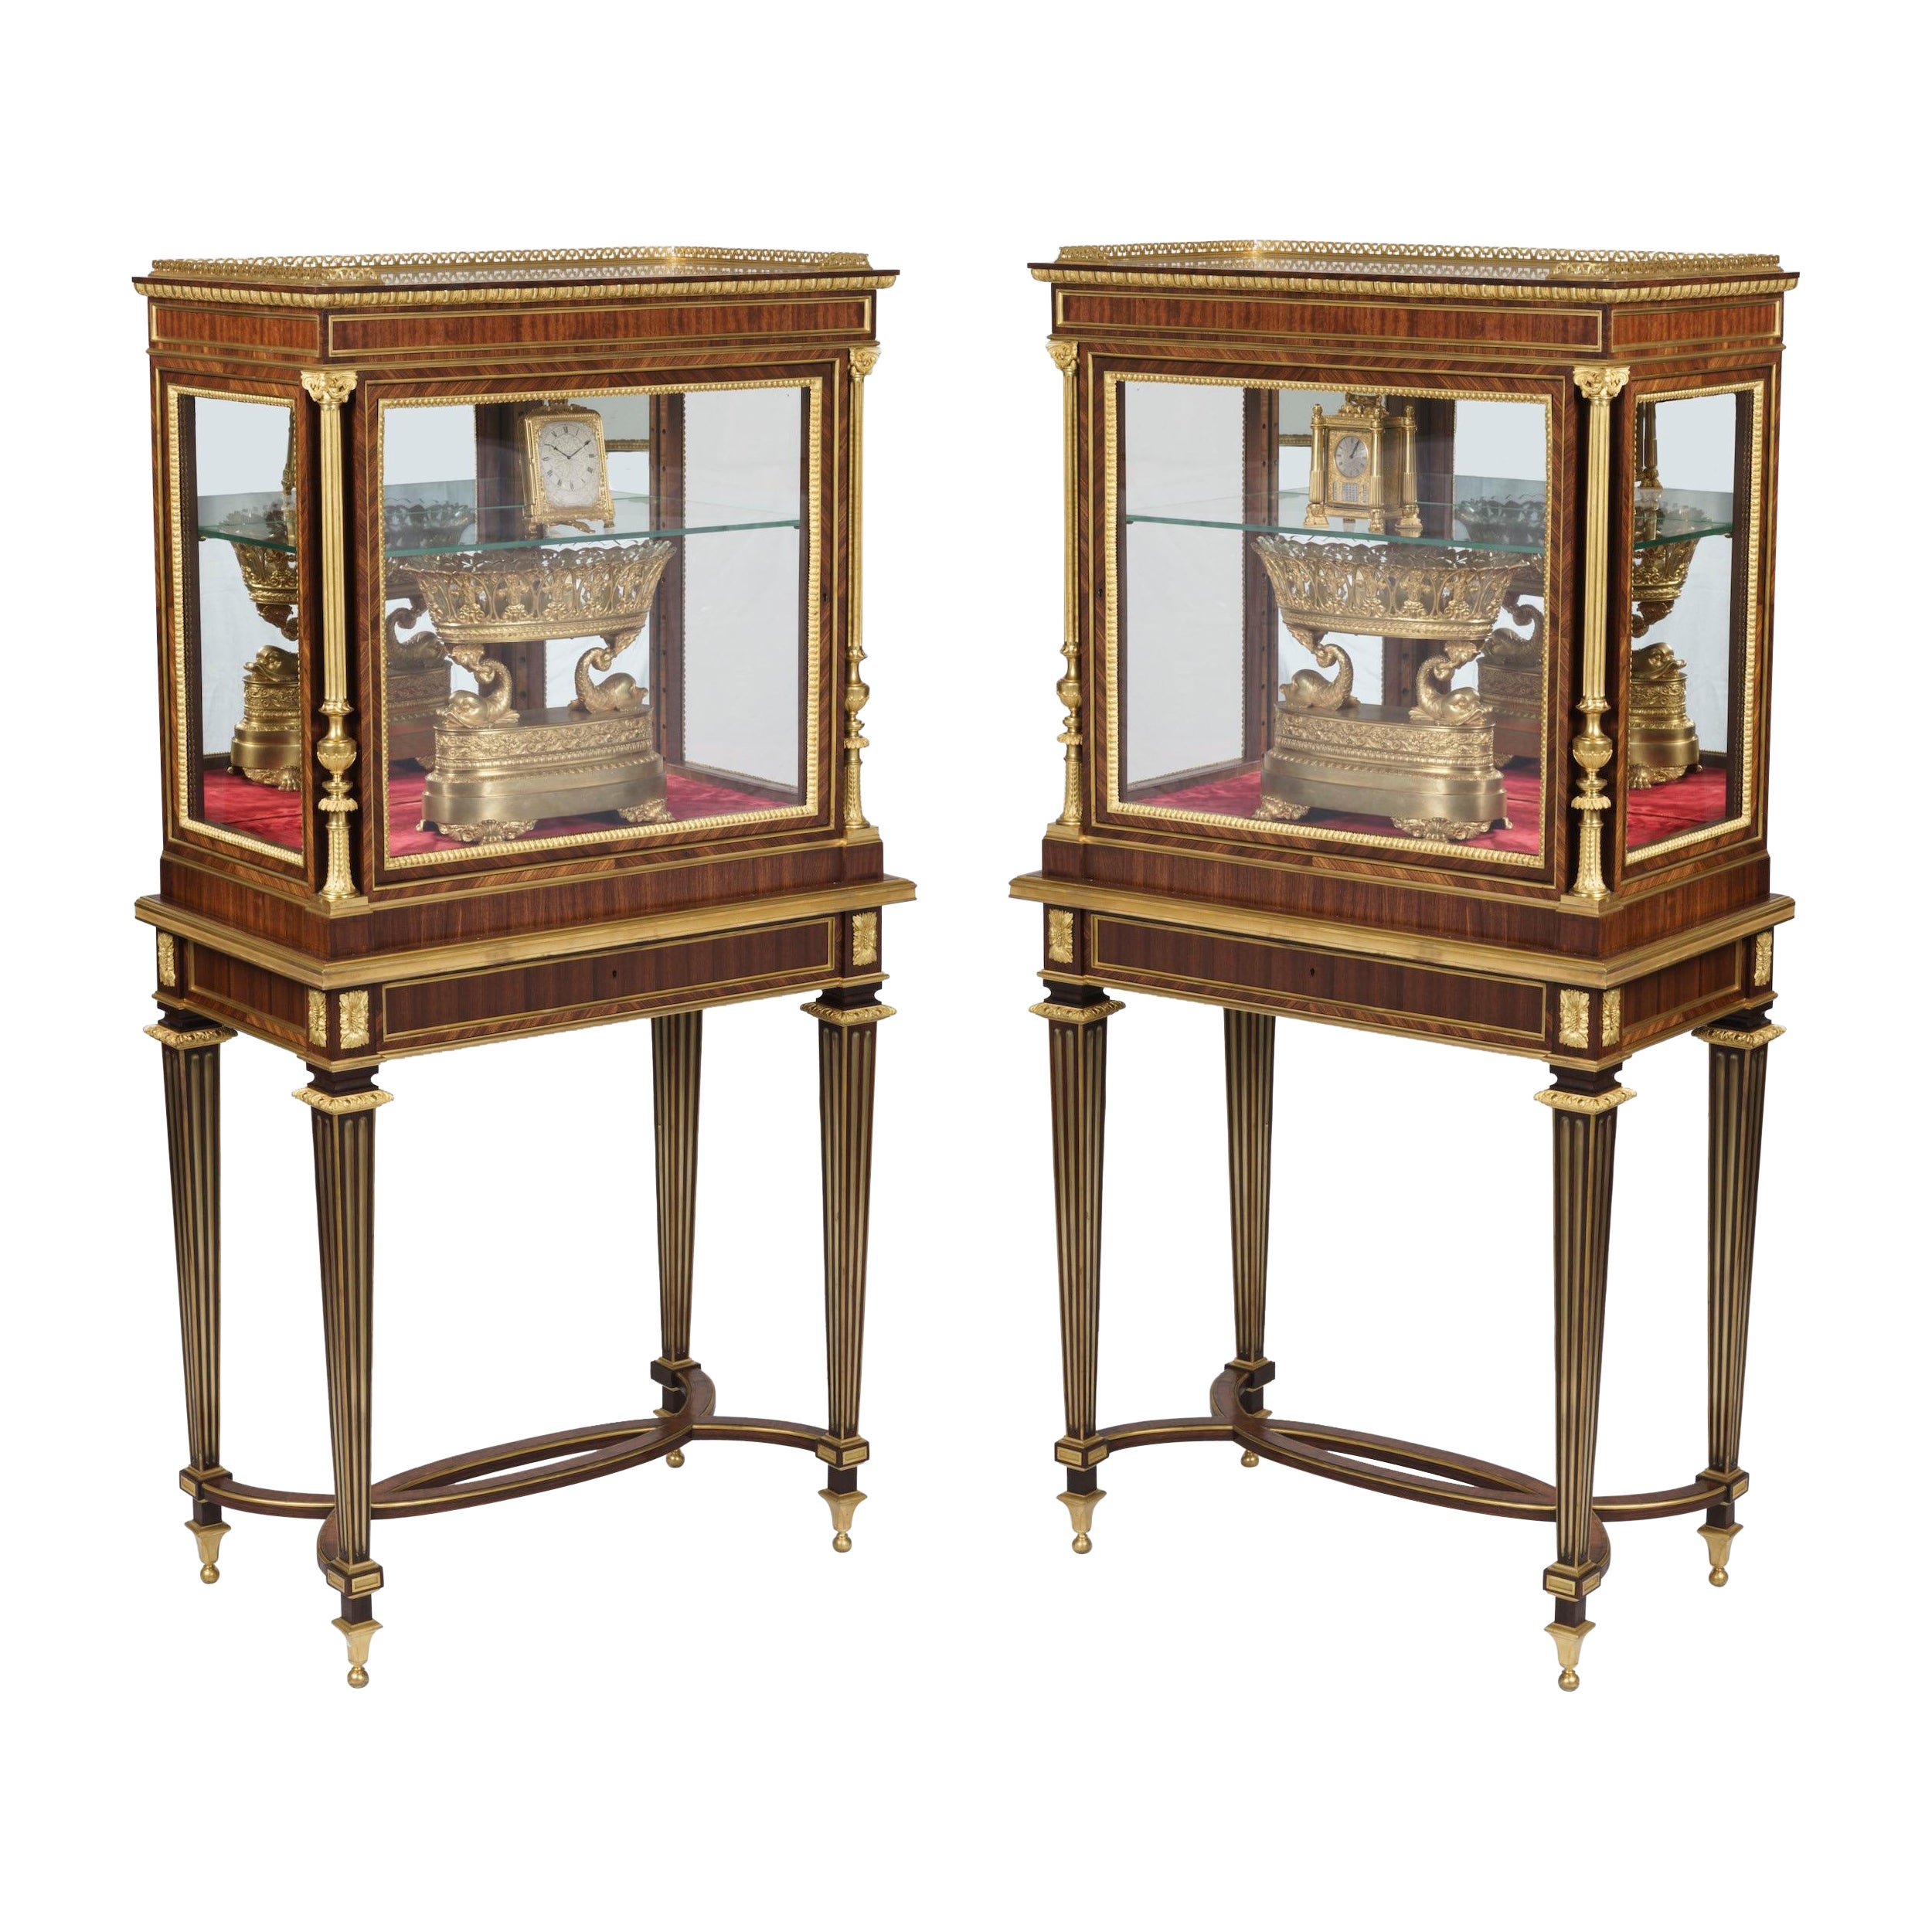 Pair of Display Cabinets in the Louis XVI Style